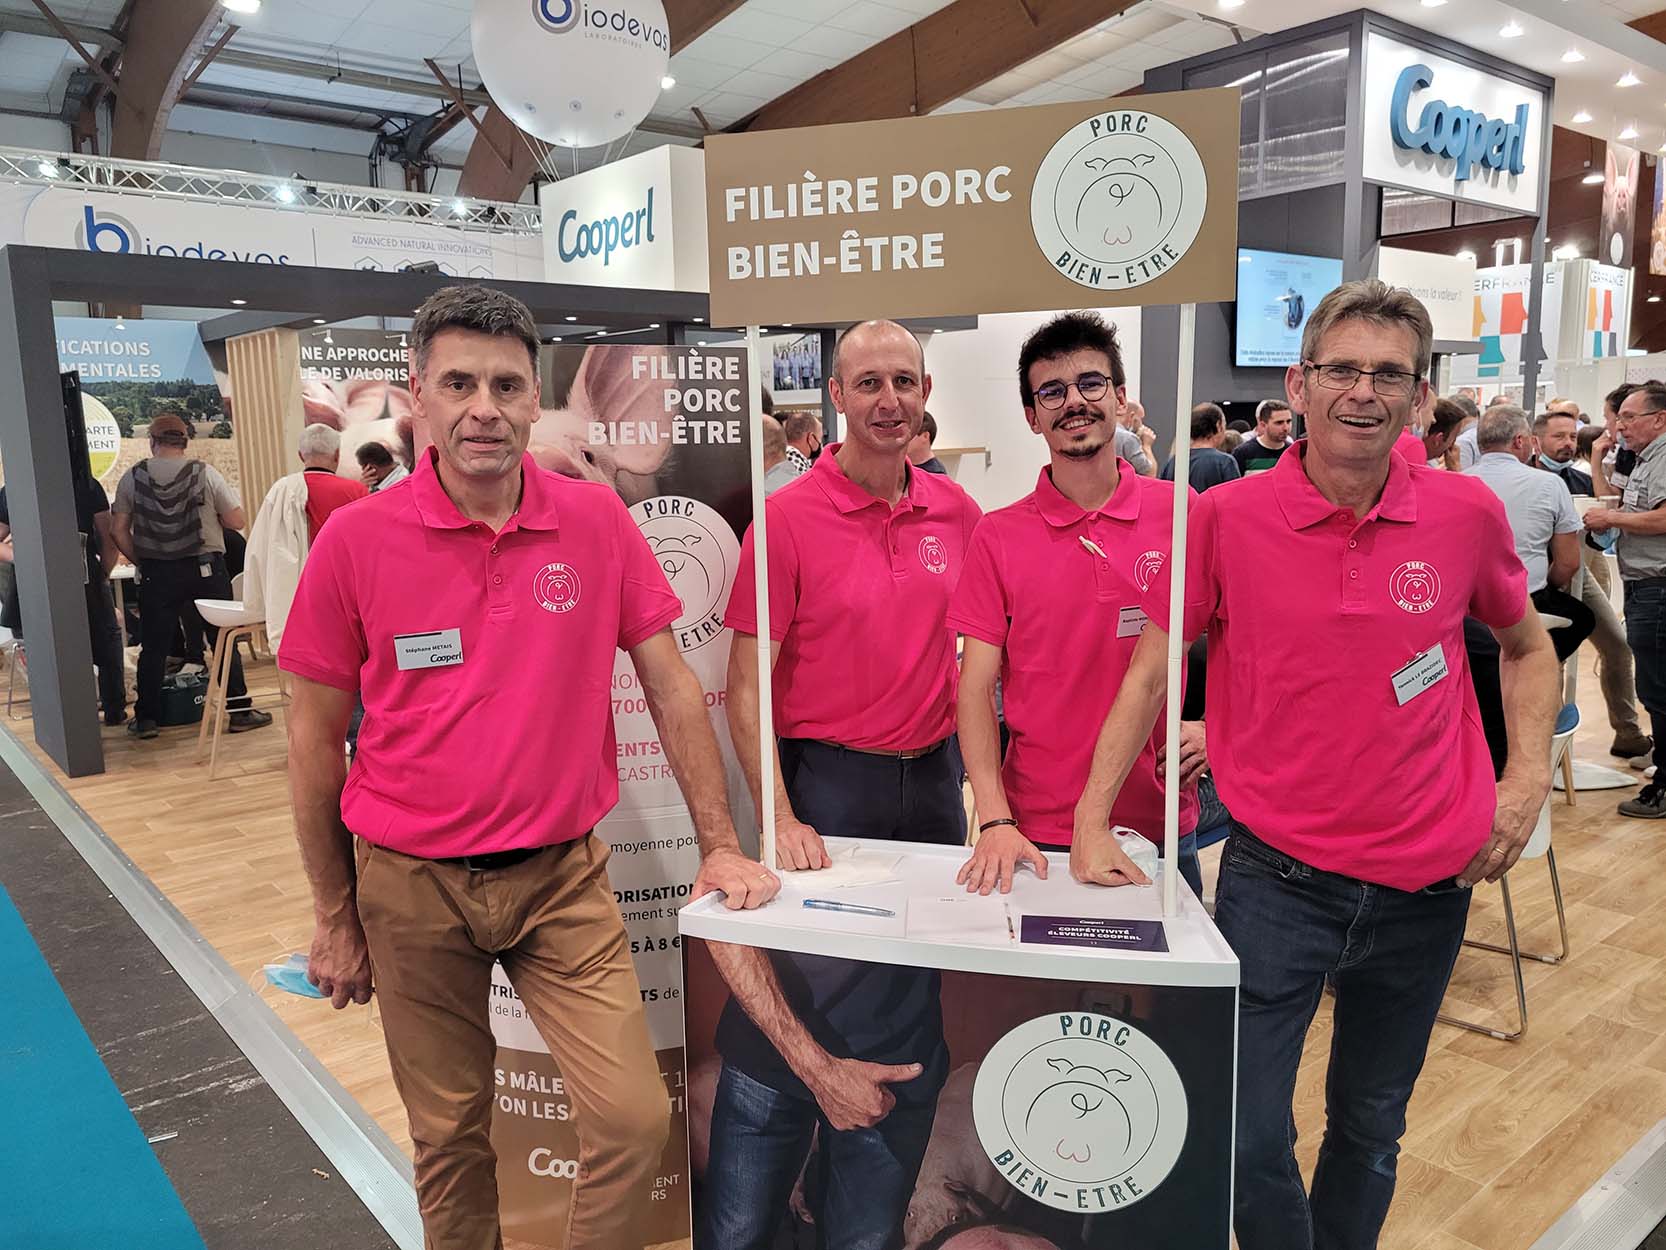 Cooperl both at SPACE international exhibition for livestock and breeding